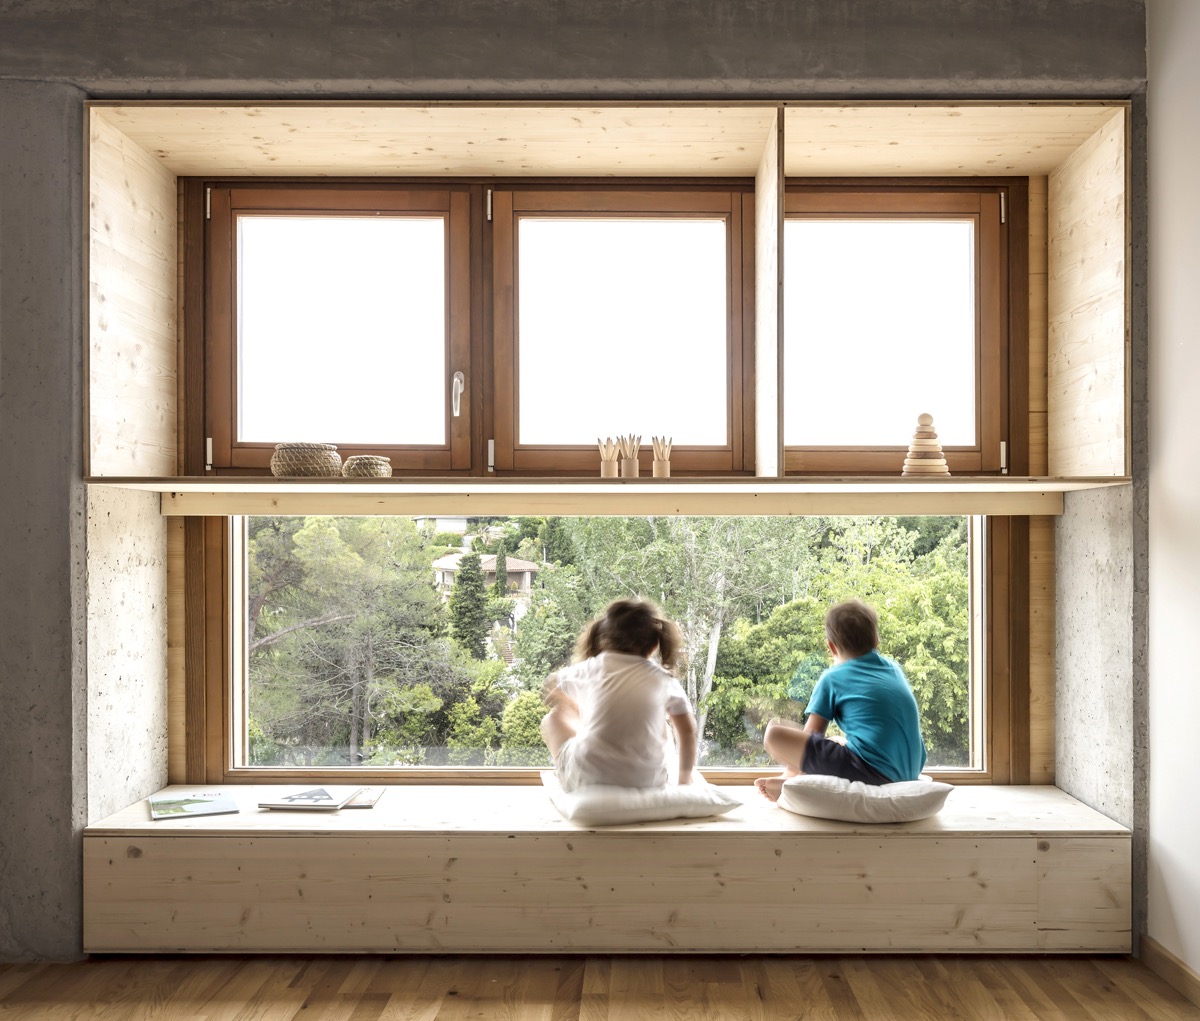 Featured image of post Sit Out Window Design : Understanding window designs and window styles is quite involved but includes the types of window muntins, window sashes, or window casing styles used.